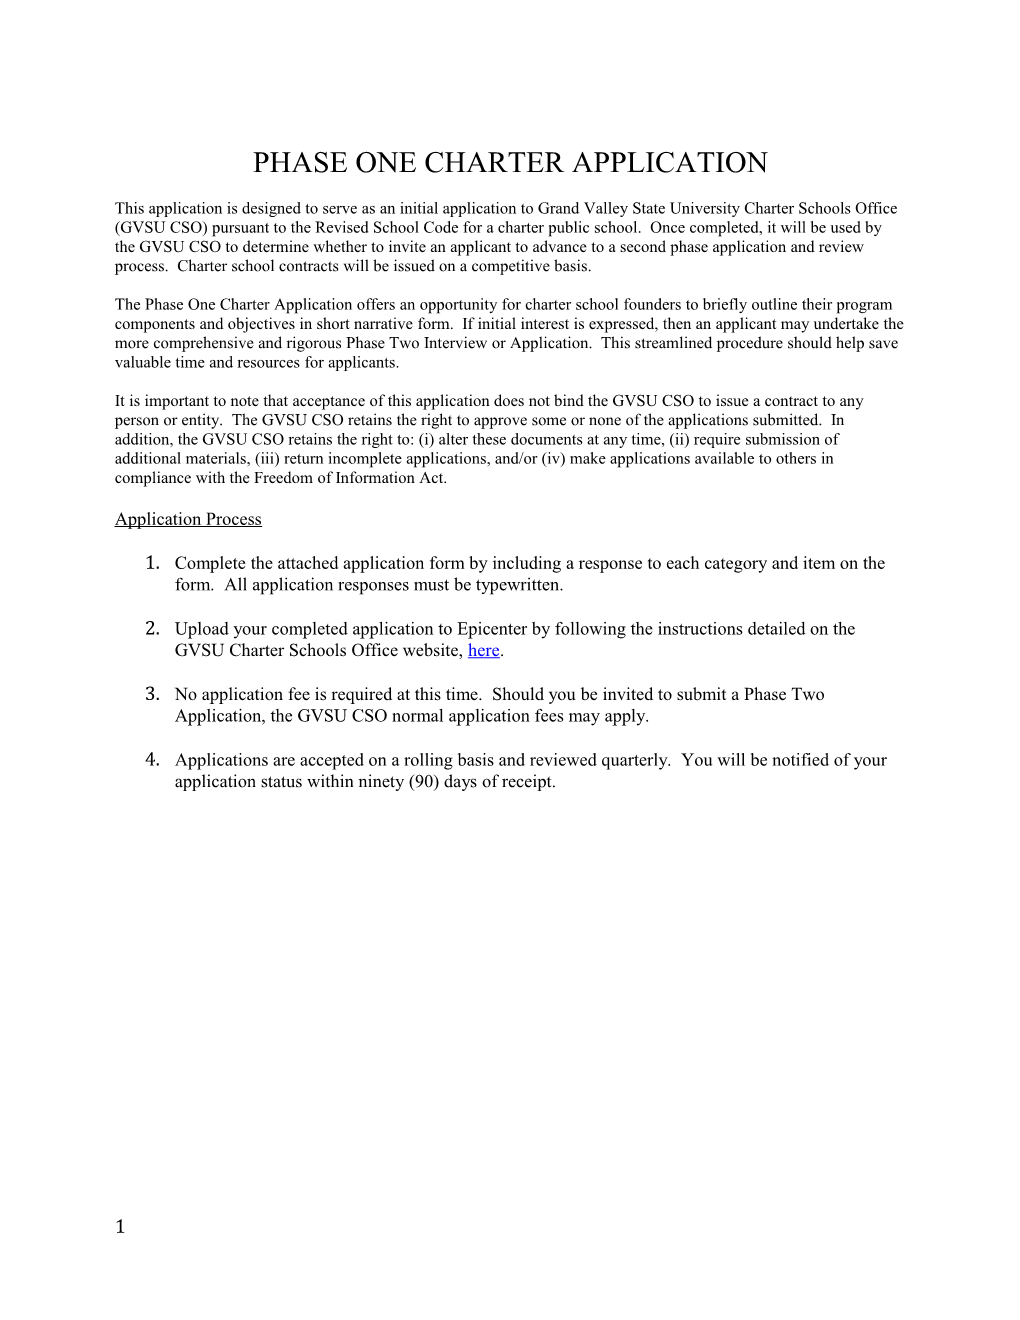 Phase One Charter Application